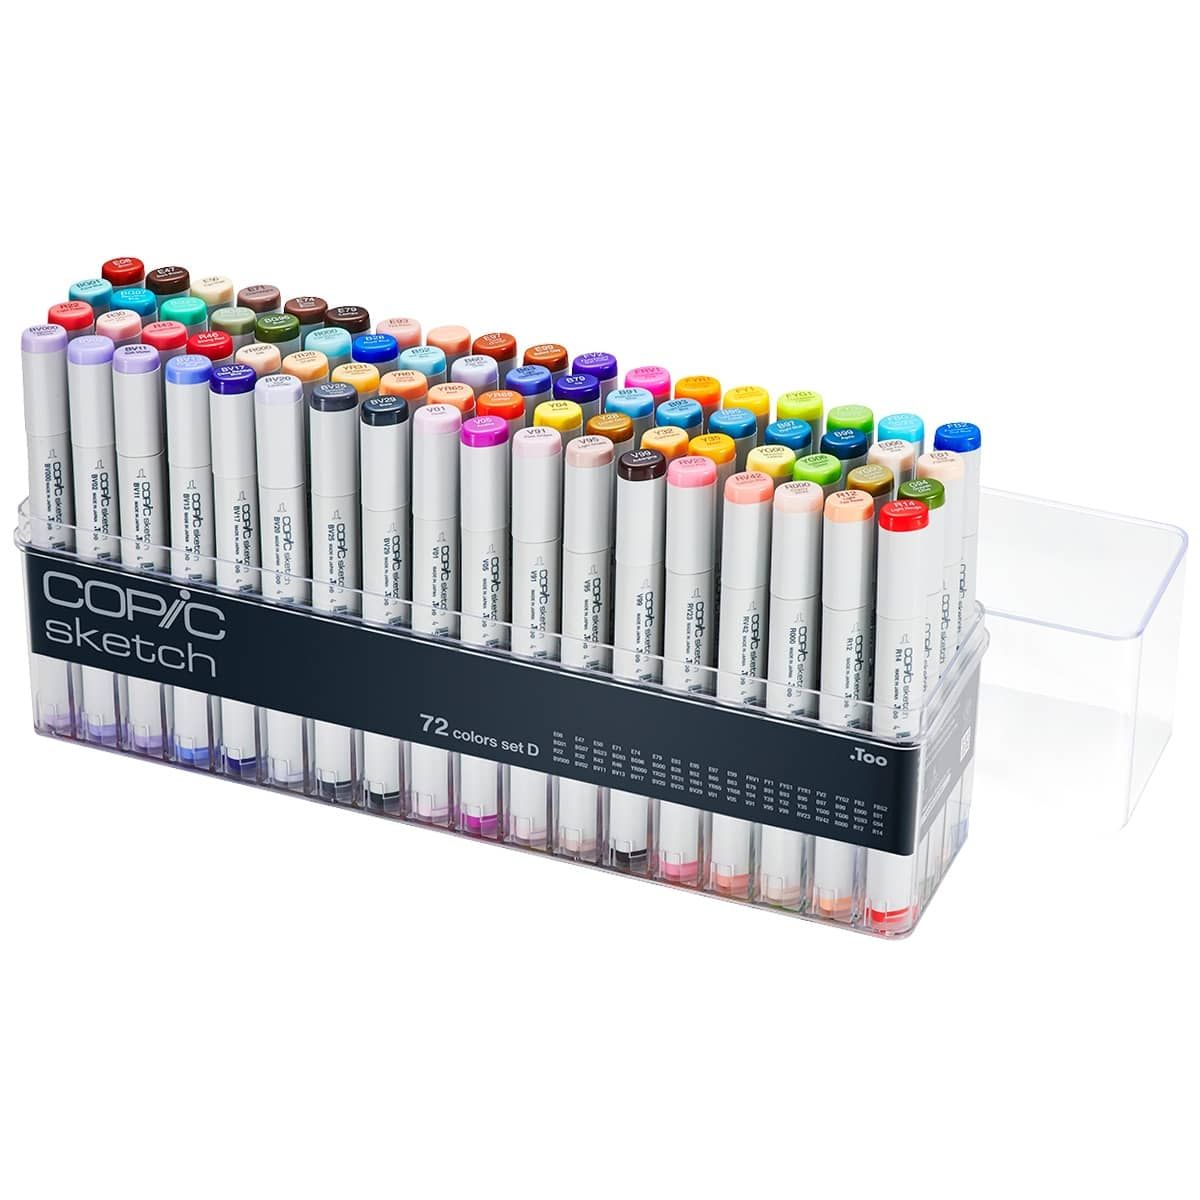 6 Packs: 6 ct. (36 total) Pastel Level 2 Dual Tip Sketch Markers